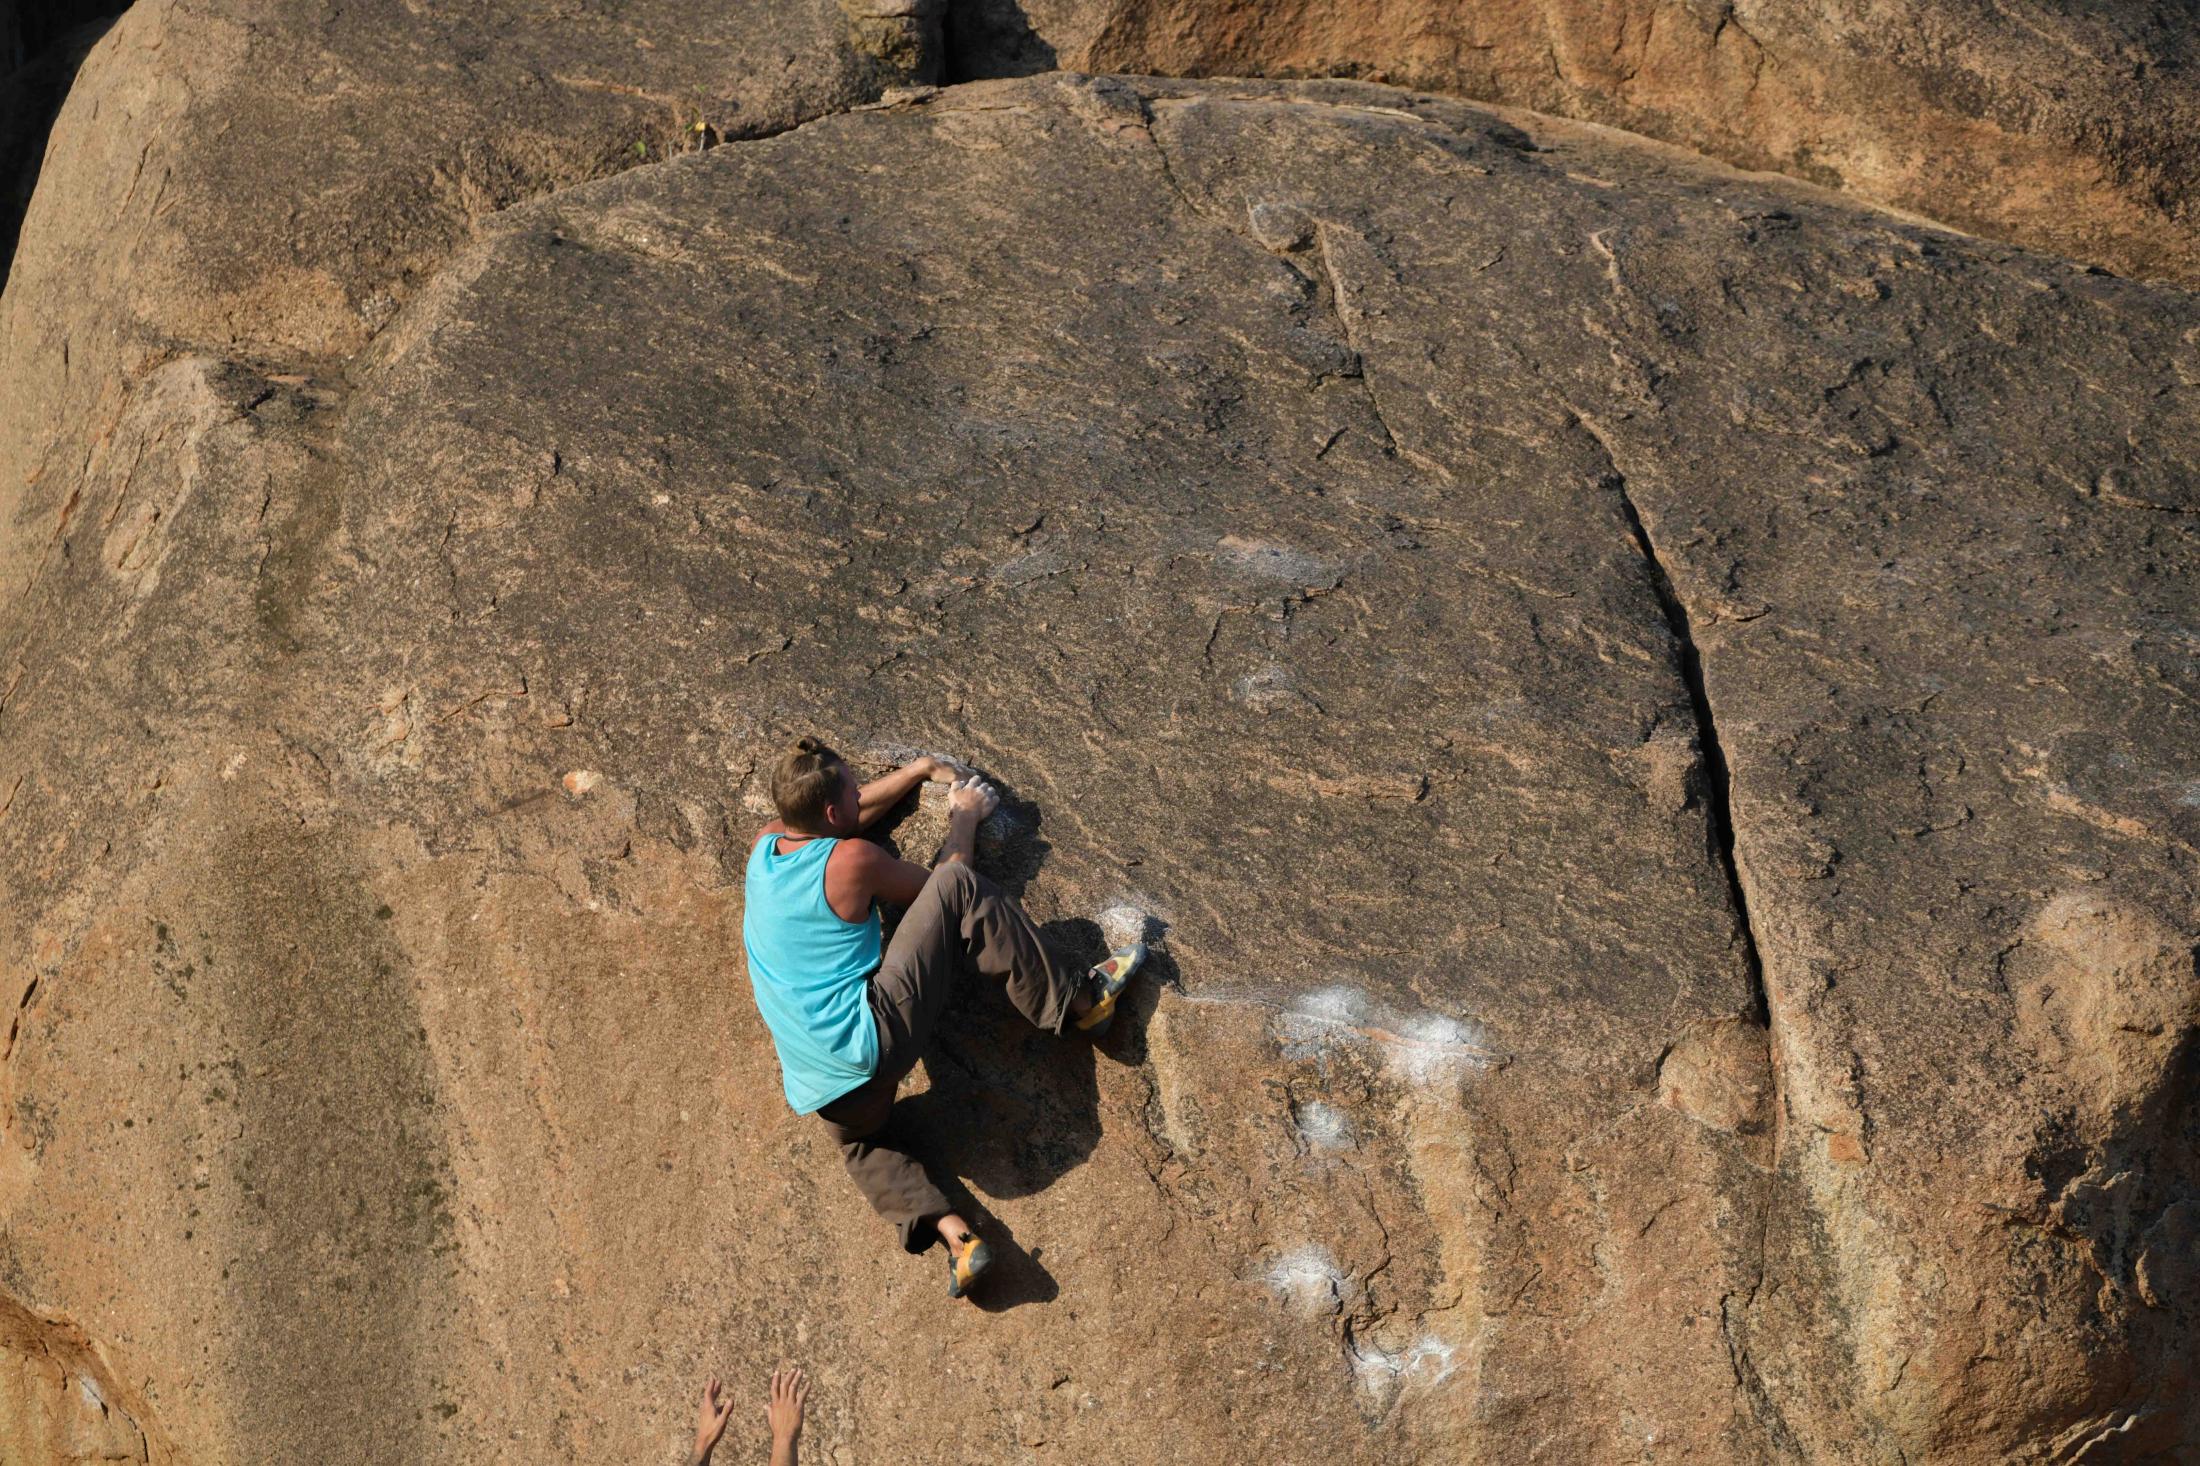 Mathias Kluger from South of Austria was introduced to bouldering during a winter when rock climbing outdoors was difficult. He said &quot;it&rsquo;s fun and more.&quot; This is his second visit to Hampi.